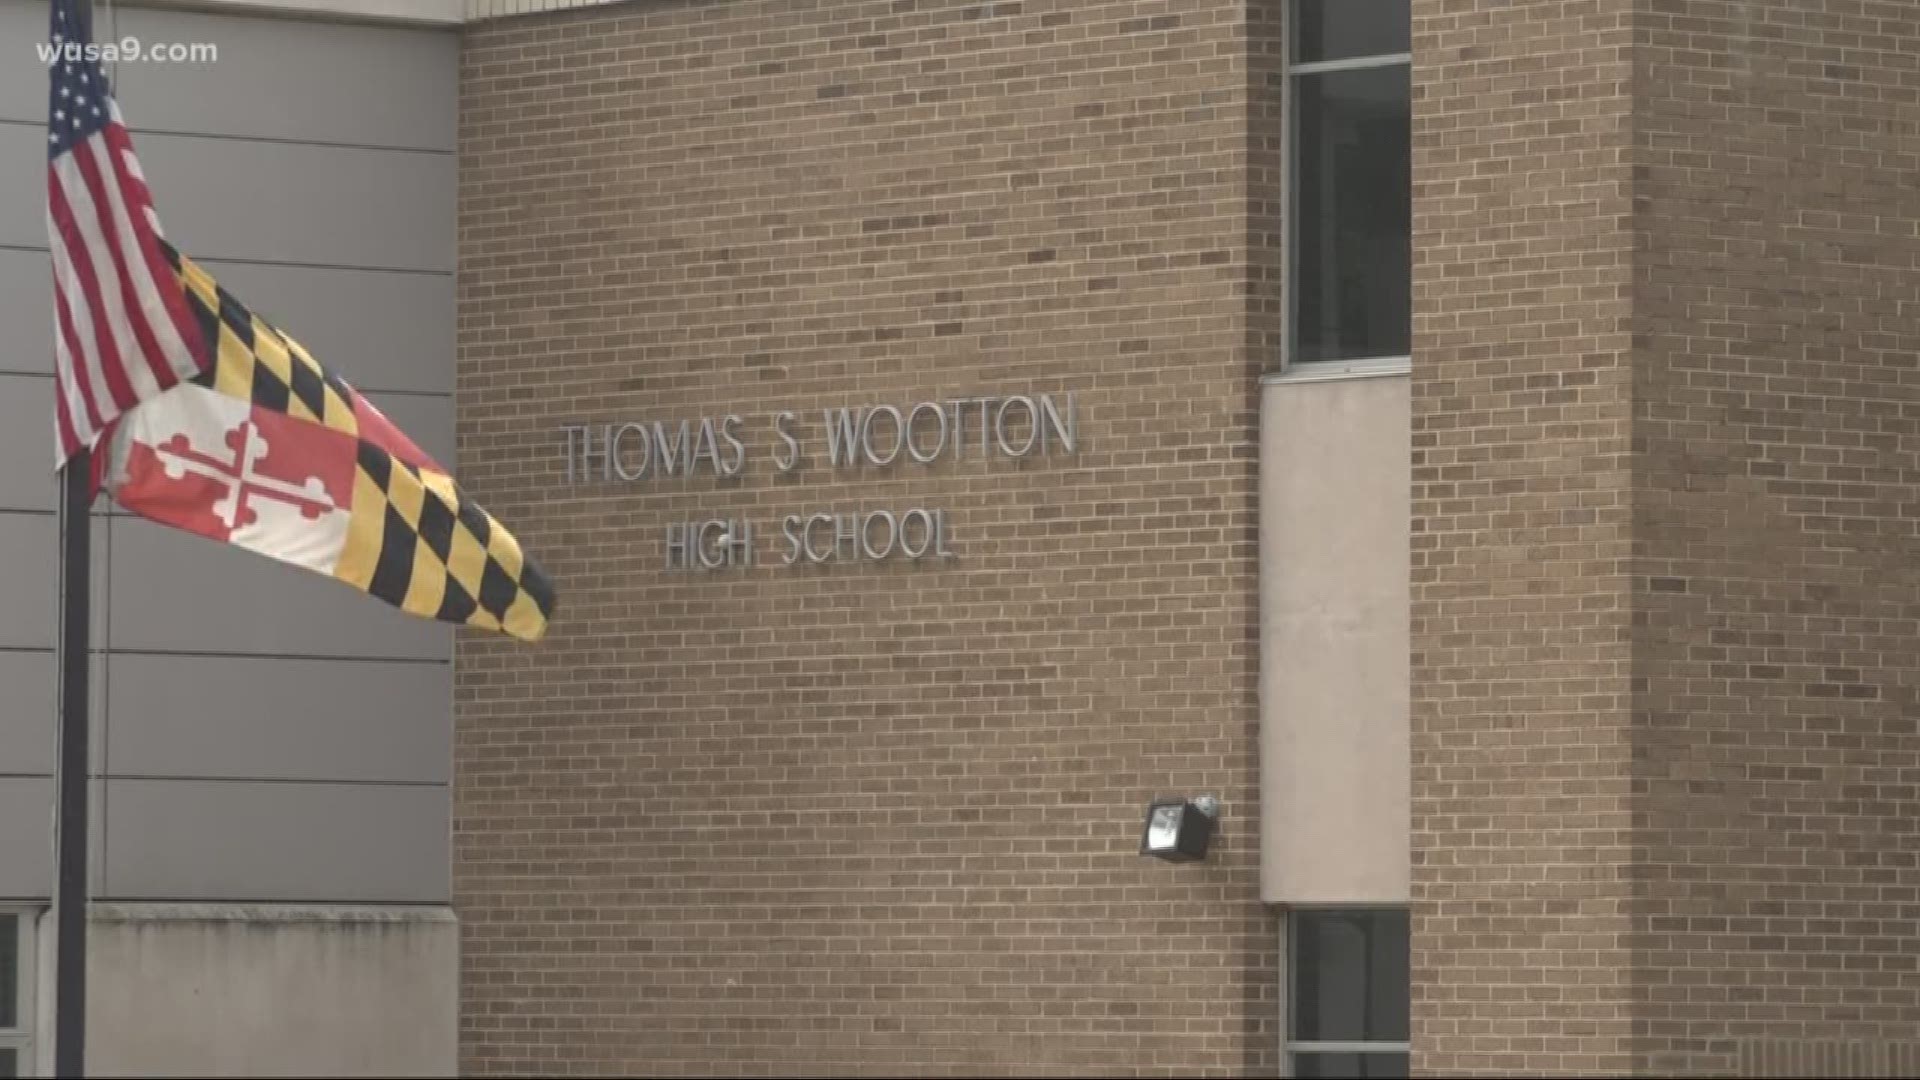 The Montgomery County Board of Education says at least six schools may have been named after slave owners.